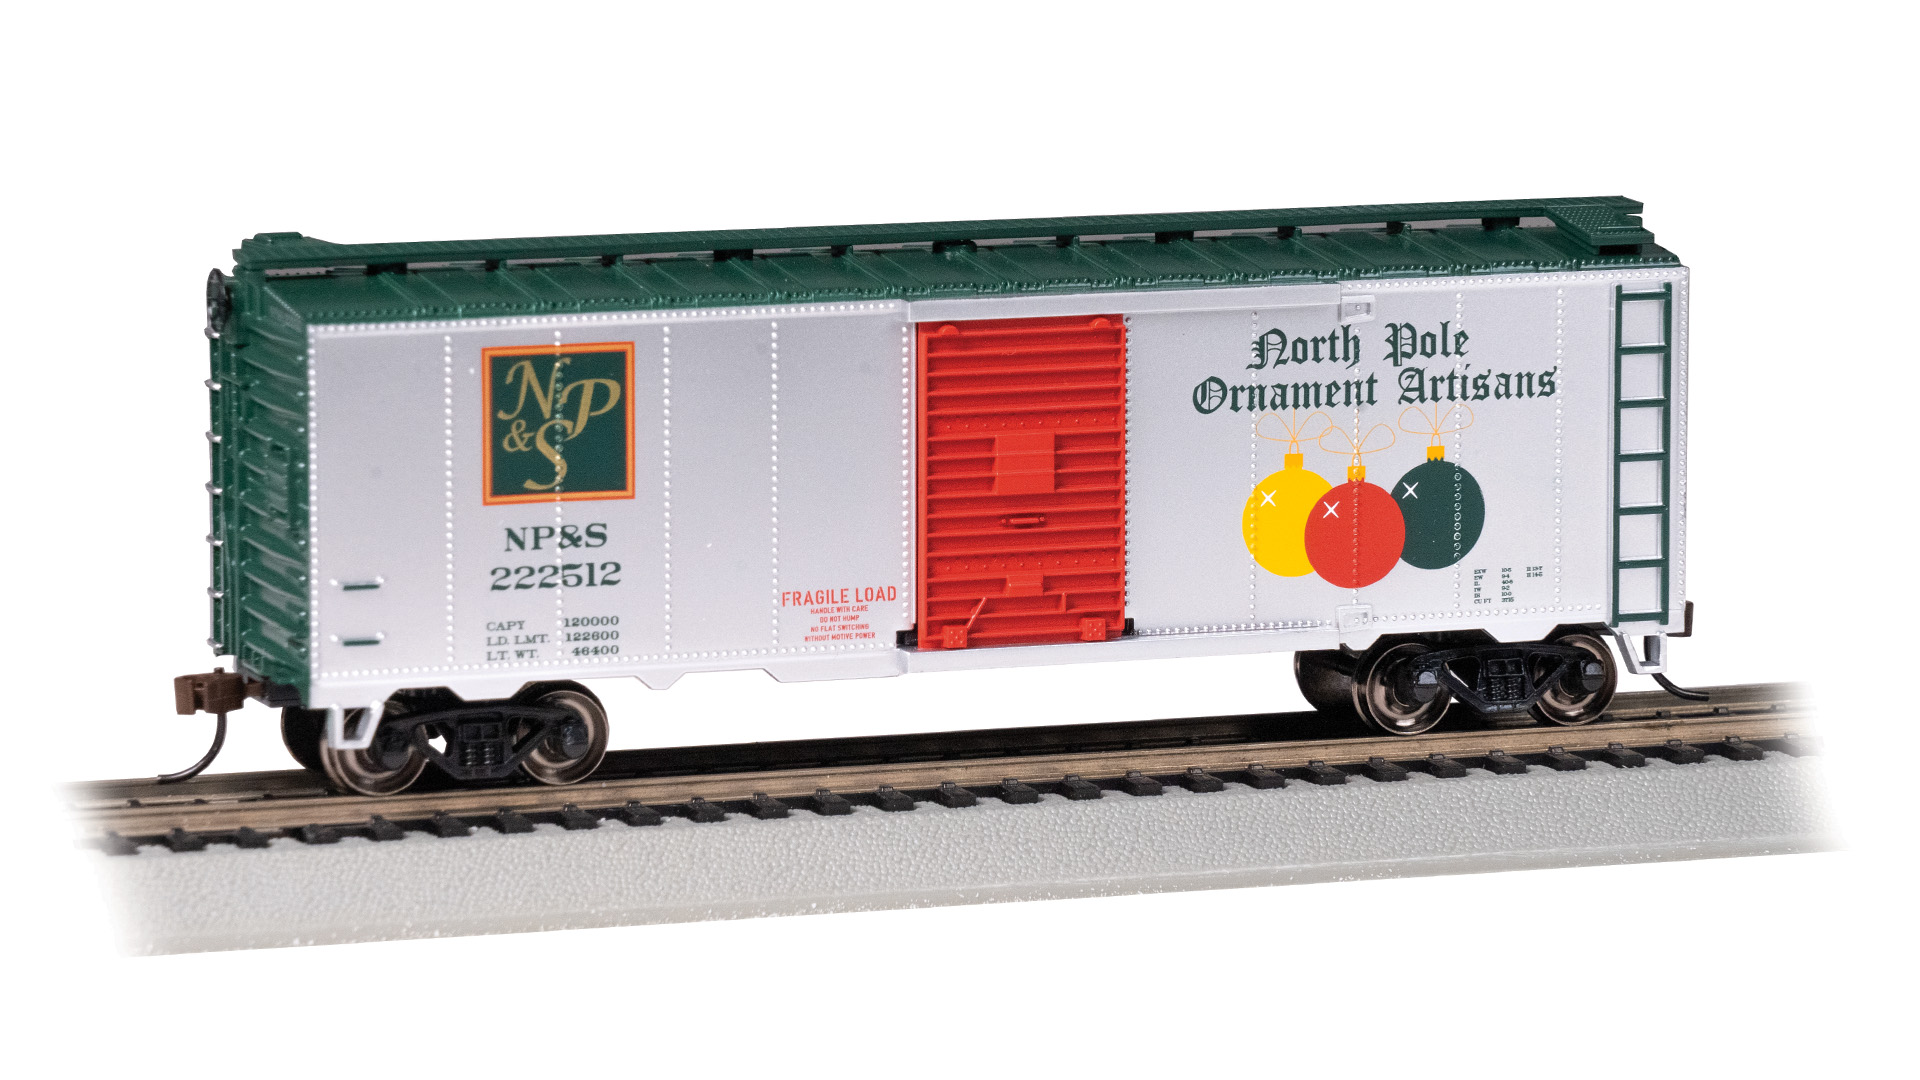 40' BOXCAR - CHRISTMAS NP&S® NORTH POLE ORNAMENT ARTISANS - Click Image to Close